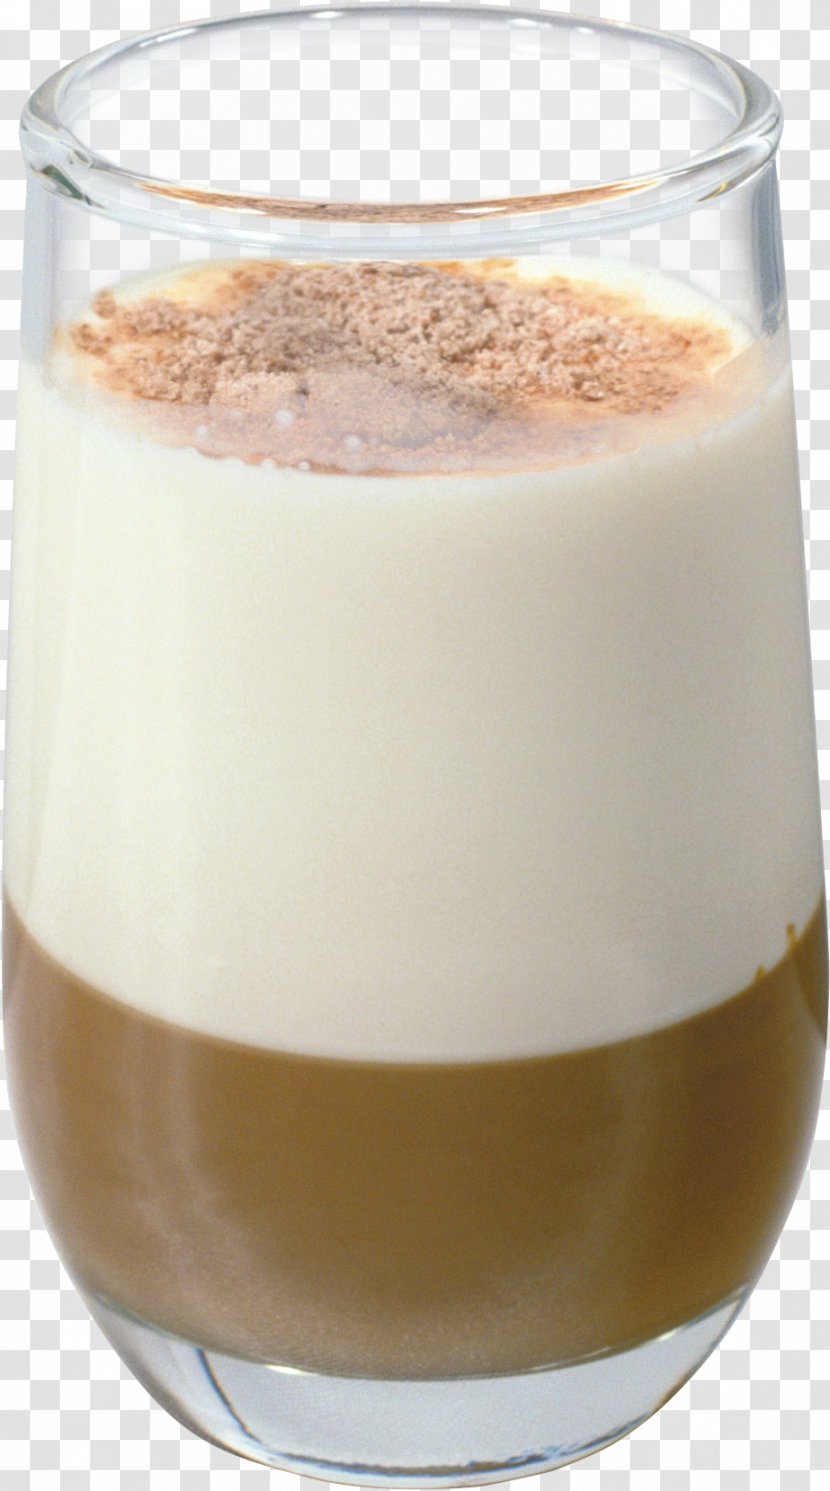 Coffee Milk White Russian Cafe - Transparent Cup Material Free To Pull Transparent PNG